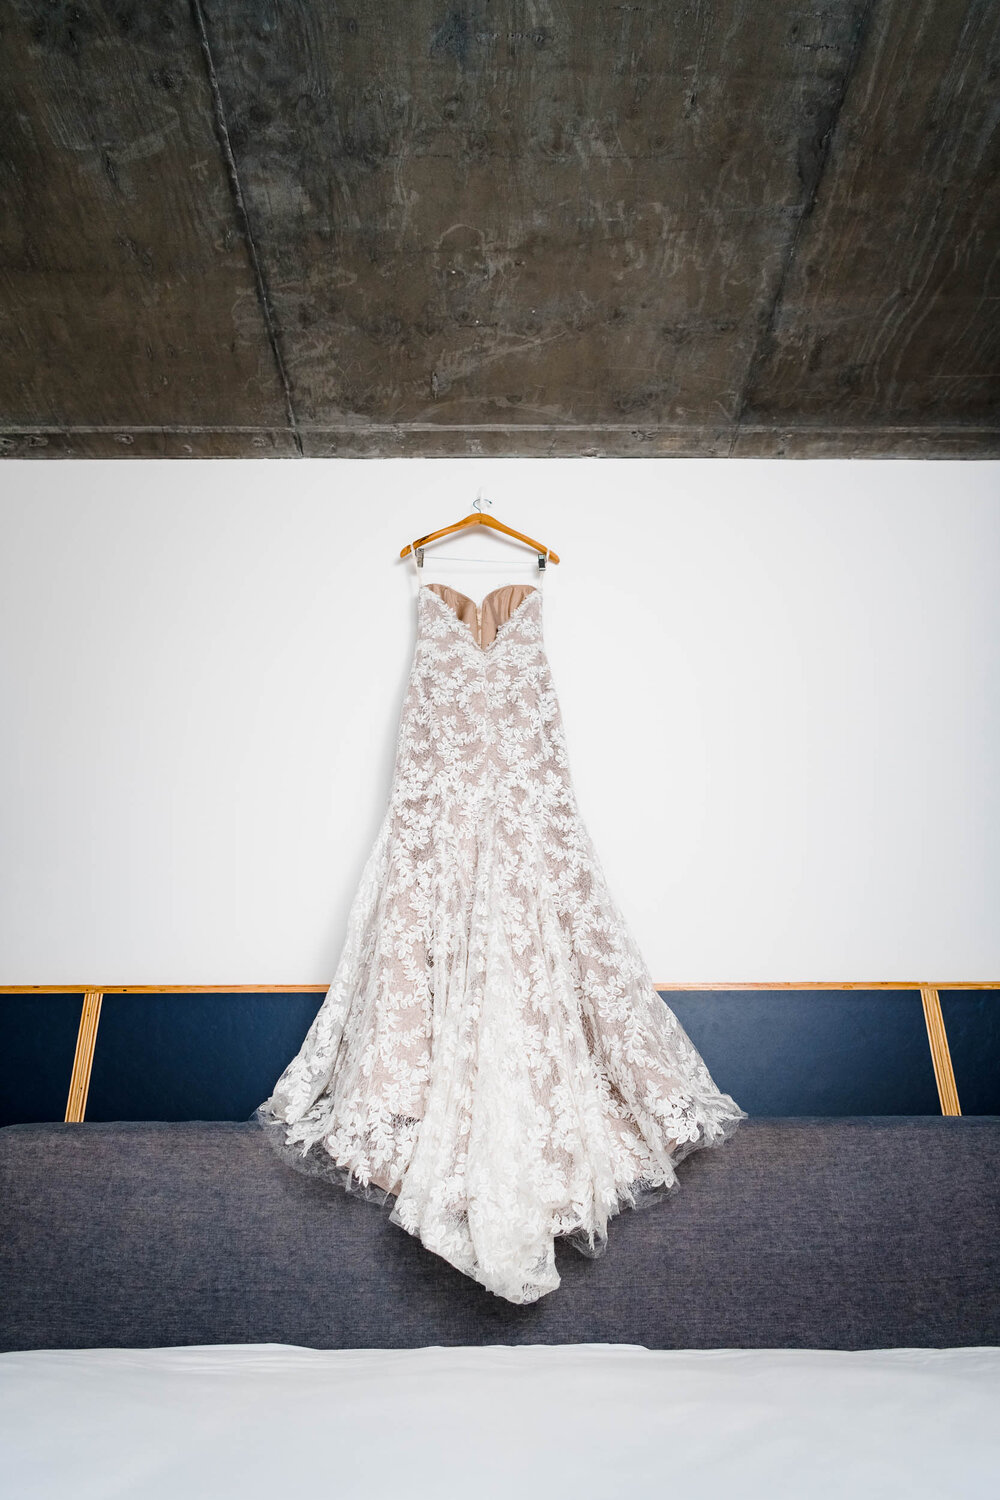 Wedding Day Photos | Ace Hotel | J. Brown Photography | creative wedding dress photo in bridal suite.